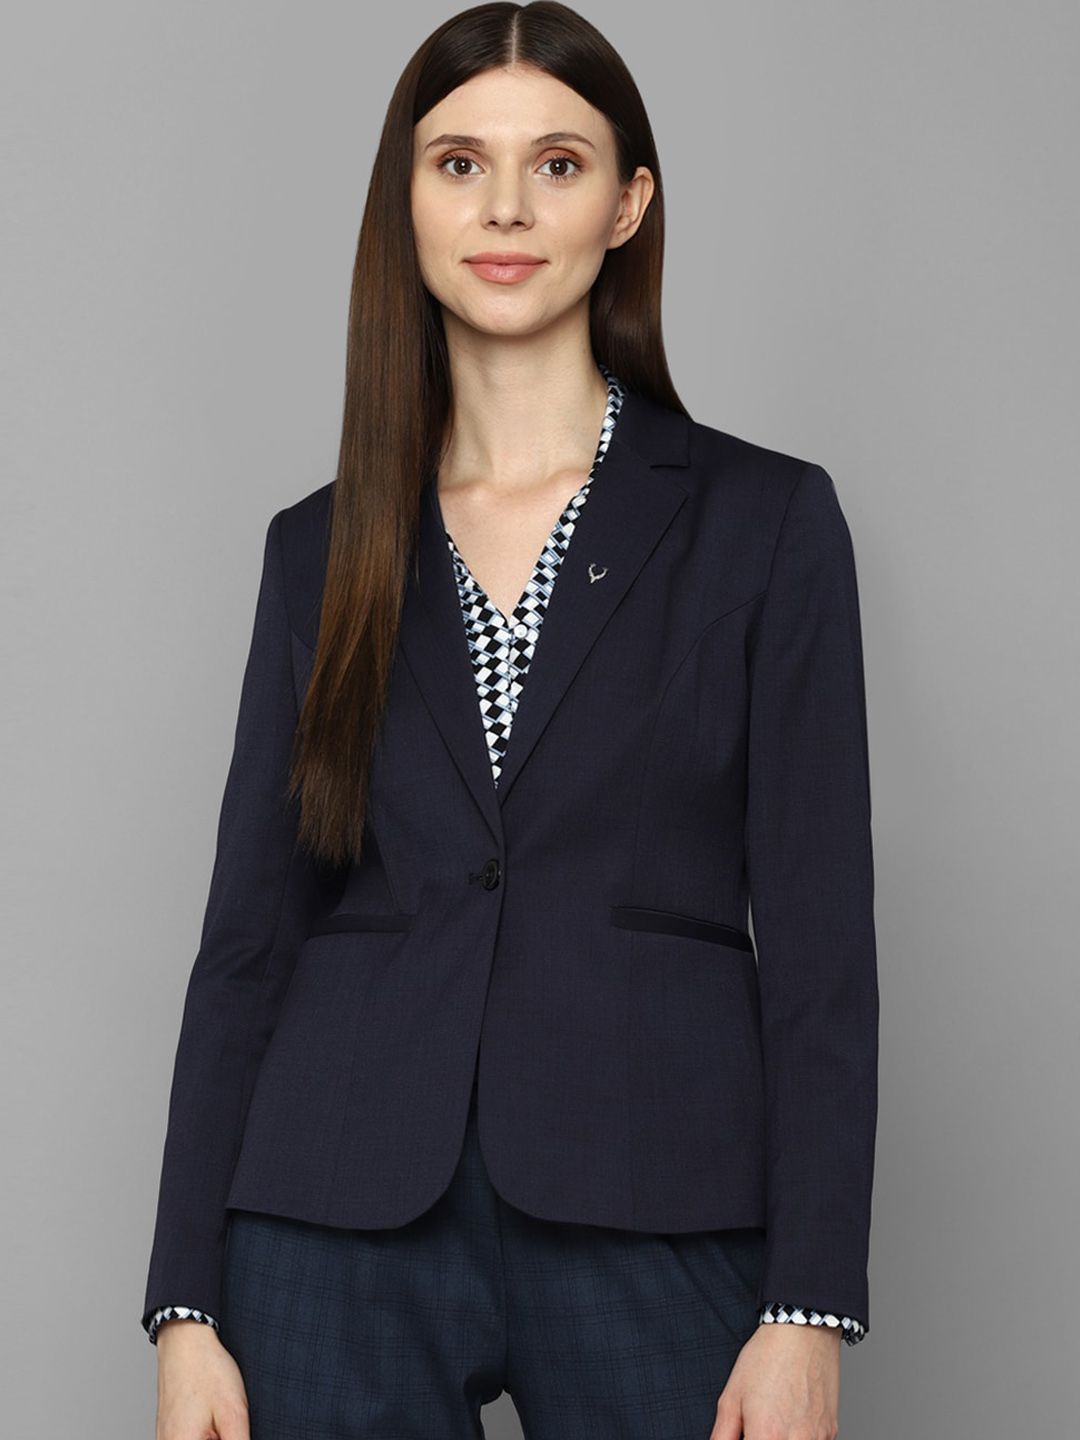 Allen Solly Woman Navy Blue Solid Single-Breasted Formal Blazer Price in India